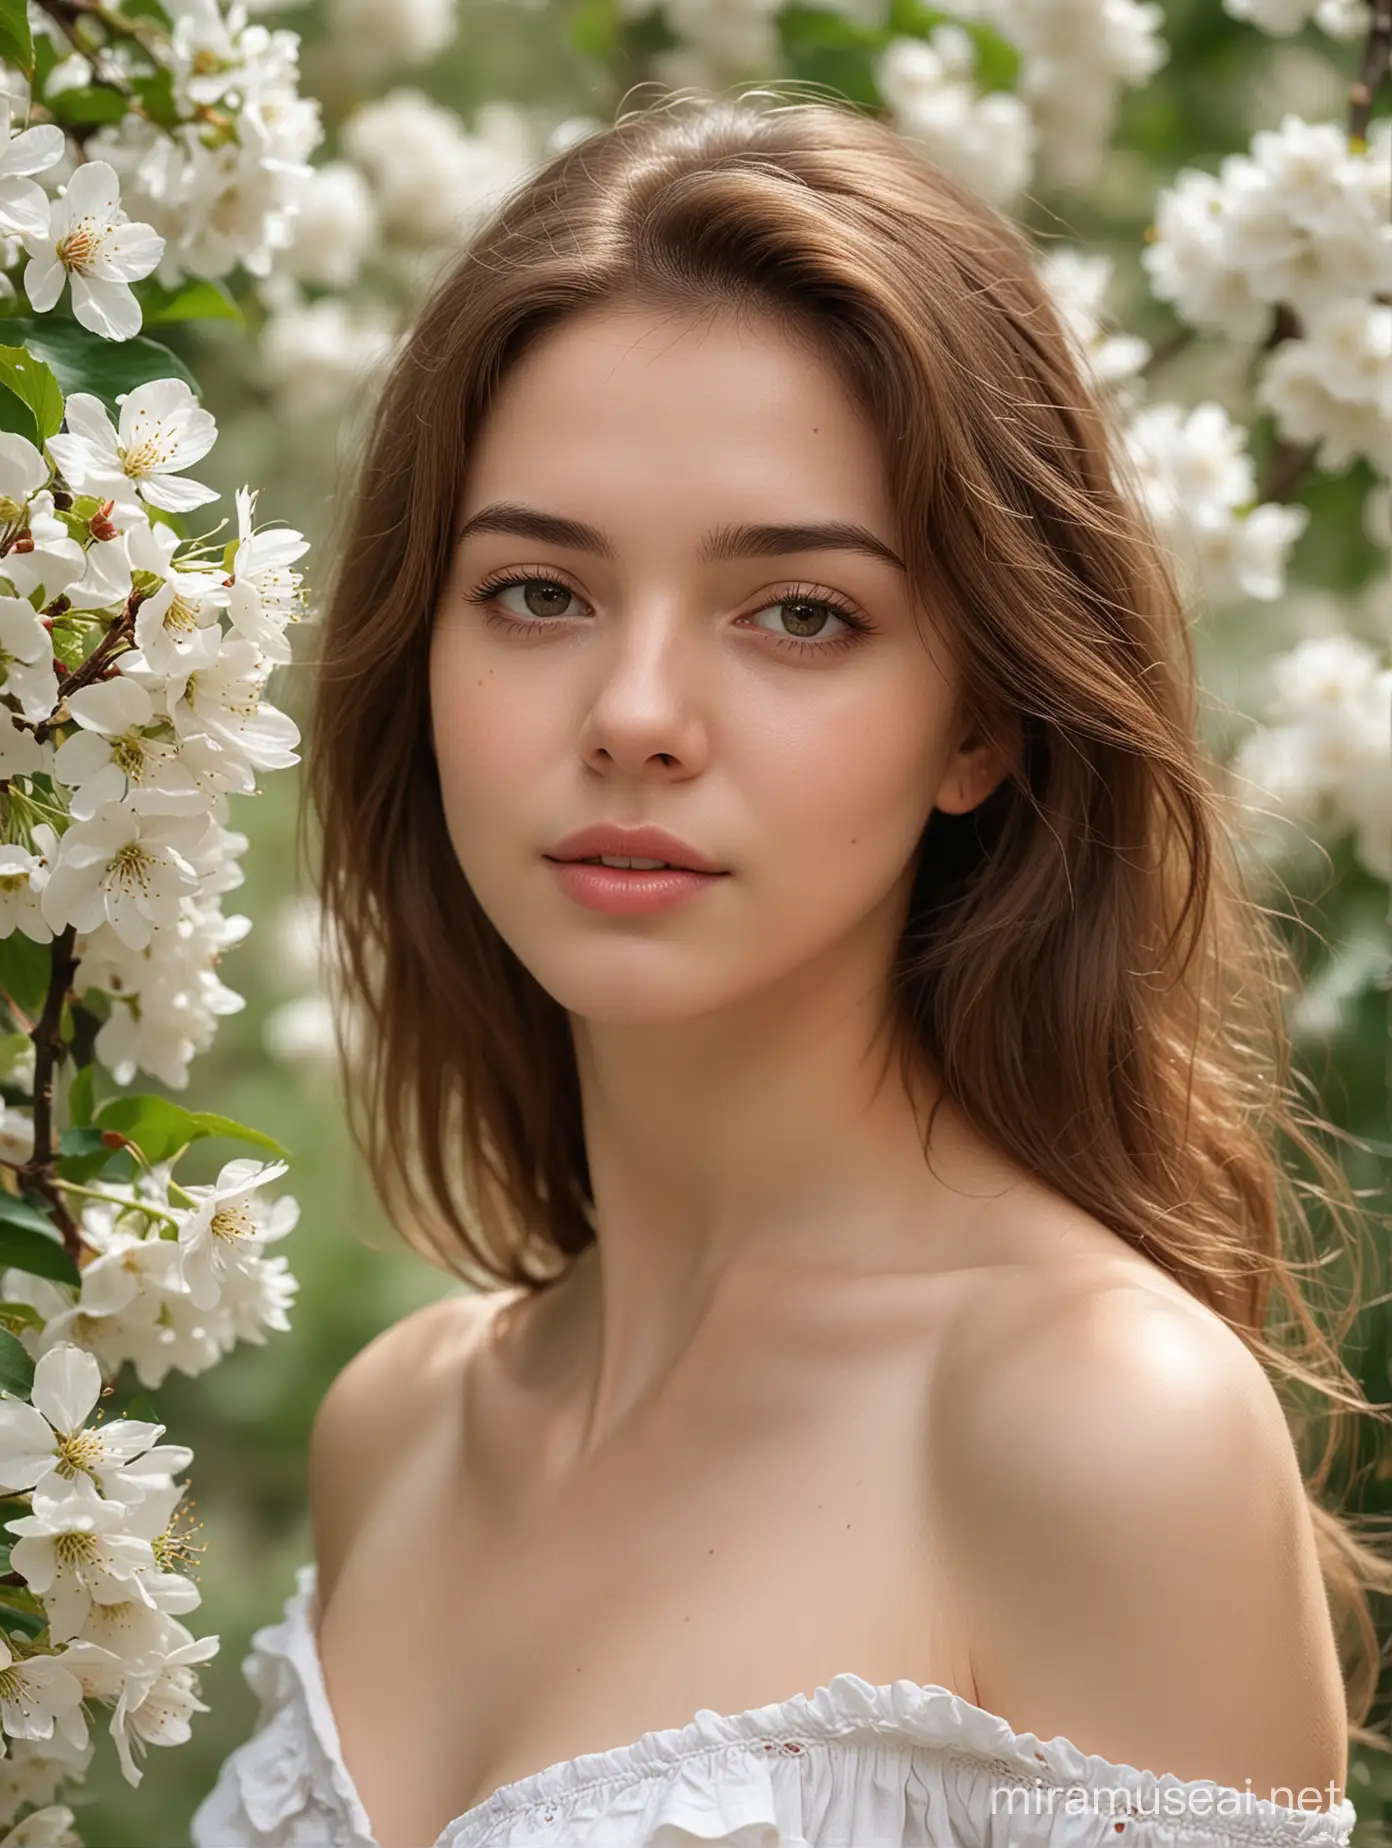 Graceful Nude Young Woman in Cherry Blossom Flower Garden